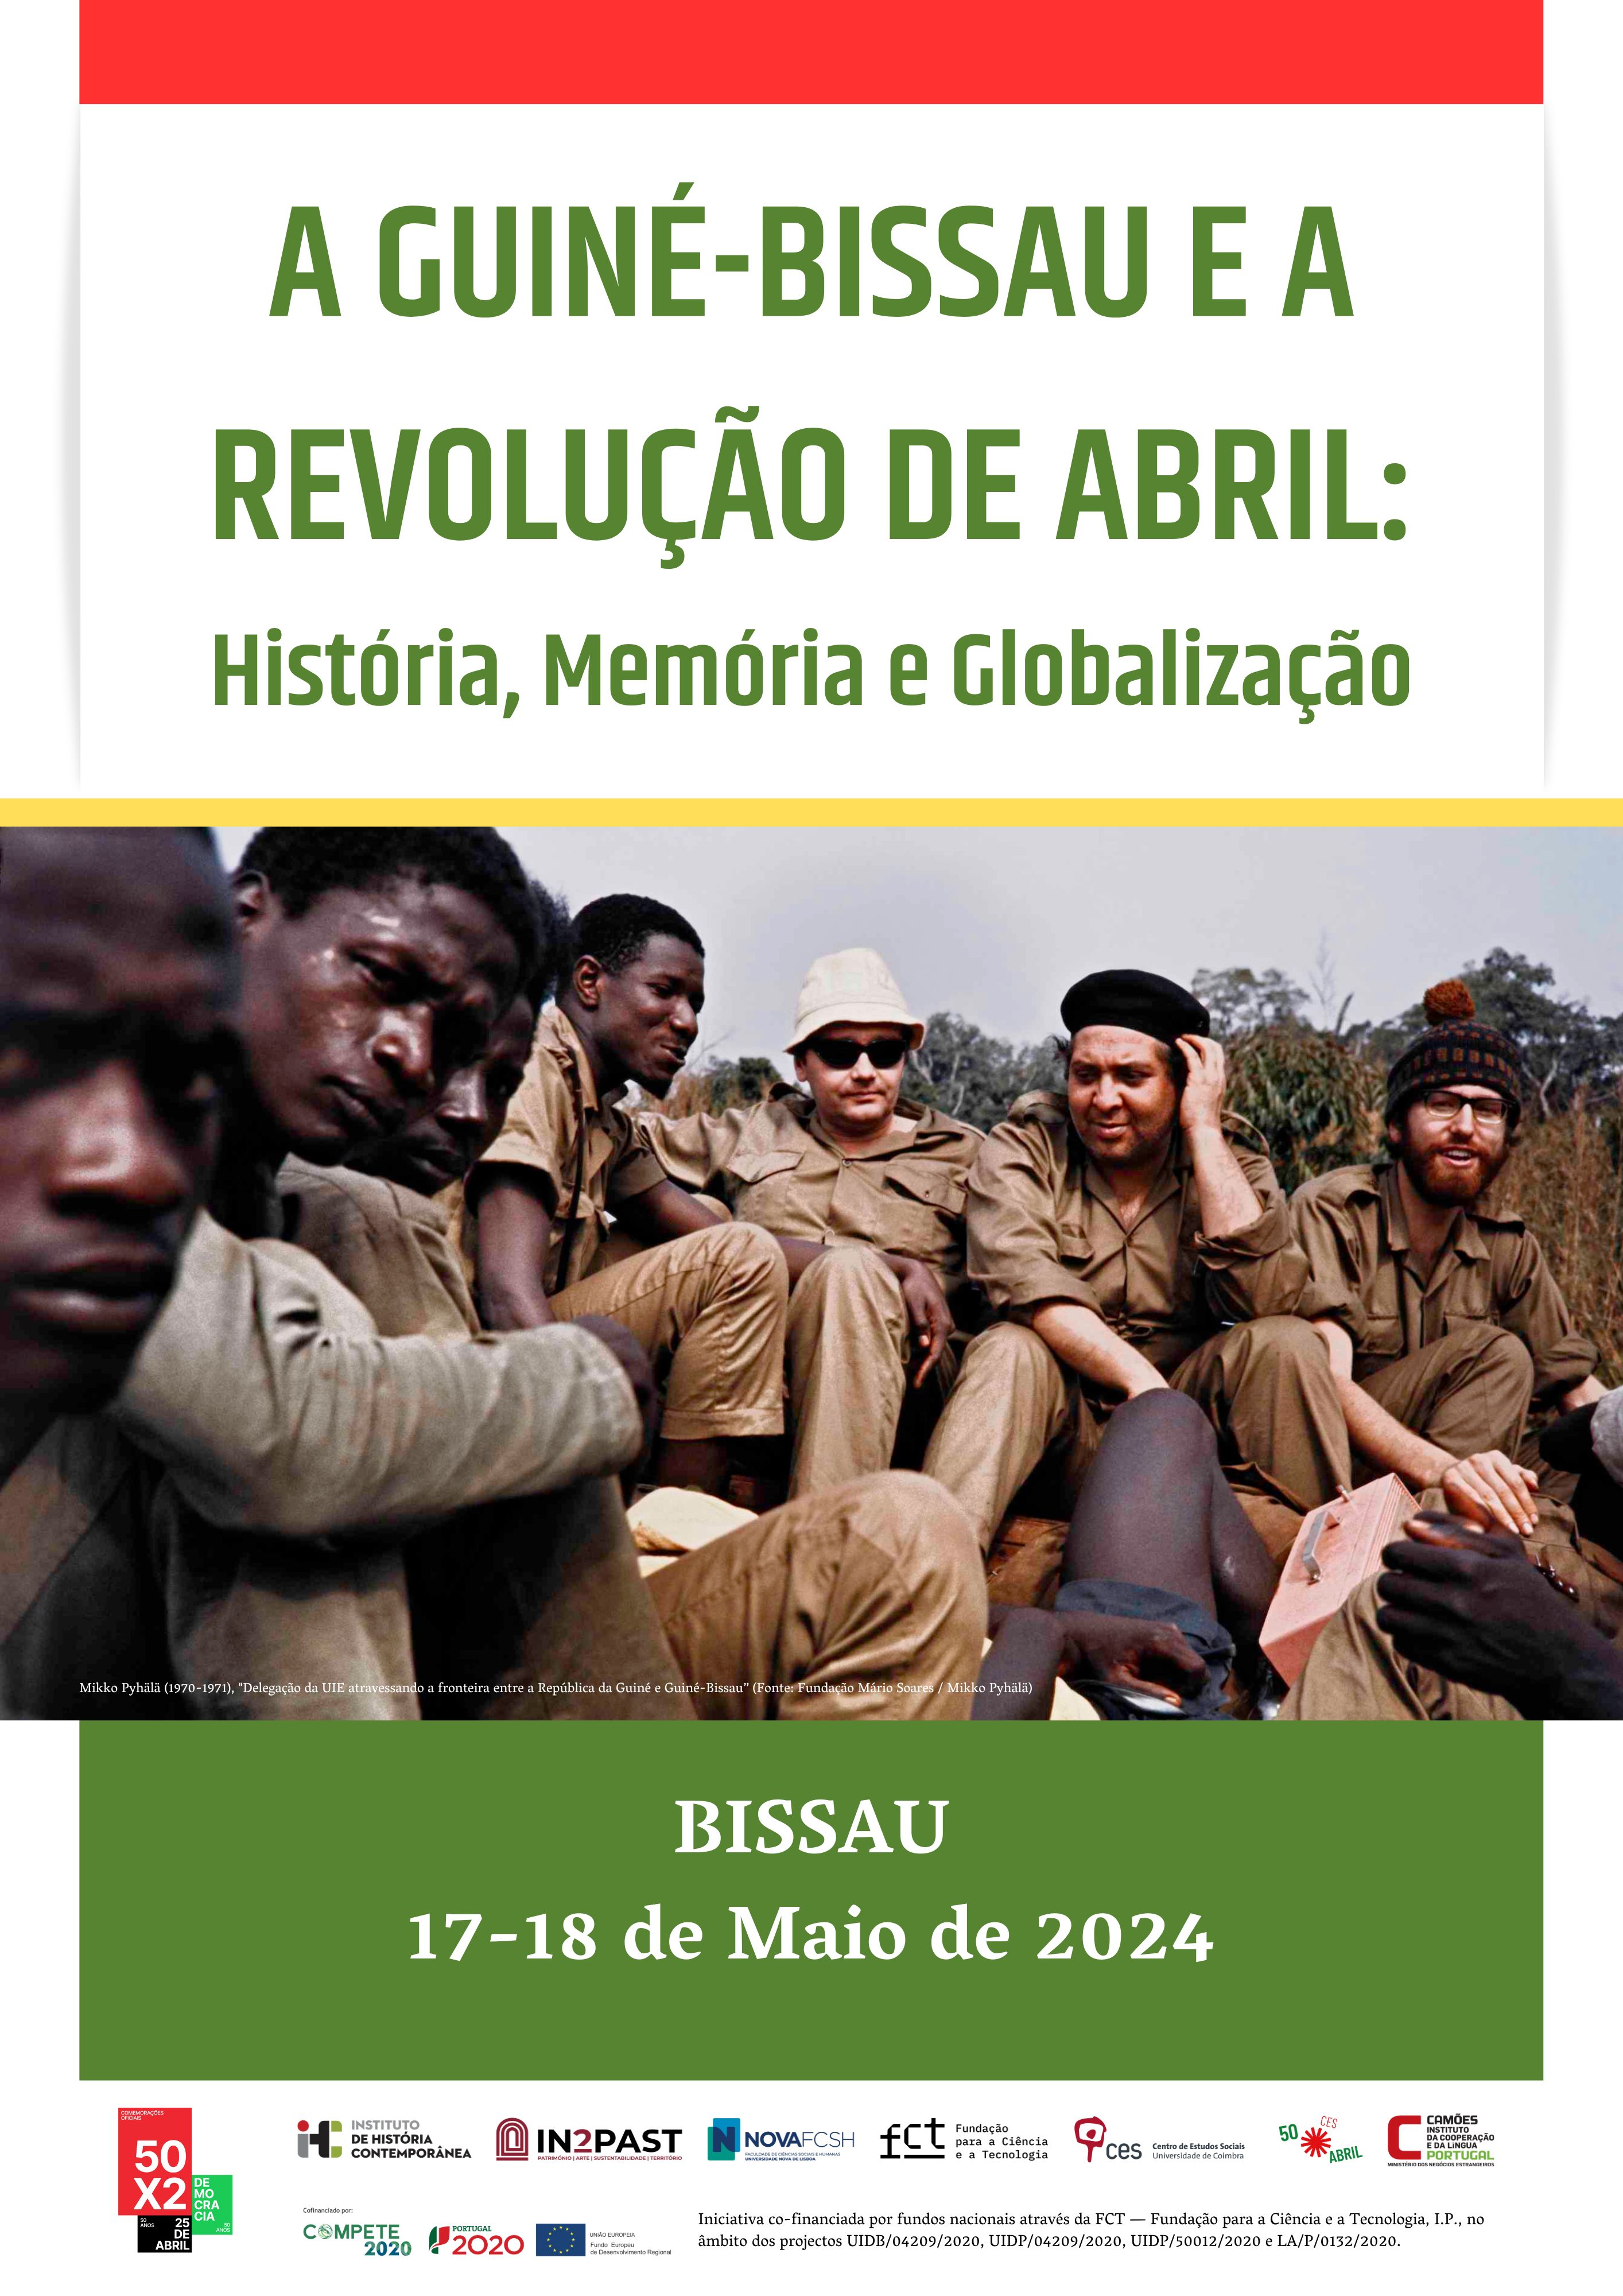 Guinea-Bissau and the April Revolution. History, Memory and Globalisation<span id="edit_45068"><script>$(function() { $('#edit_45068').load( "/myces/user/editobj.php?tipo=evento&id=45068" ); });</script></span>